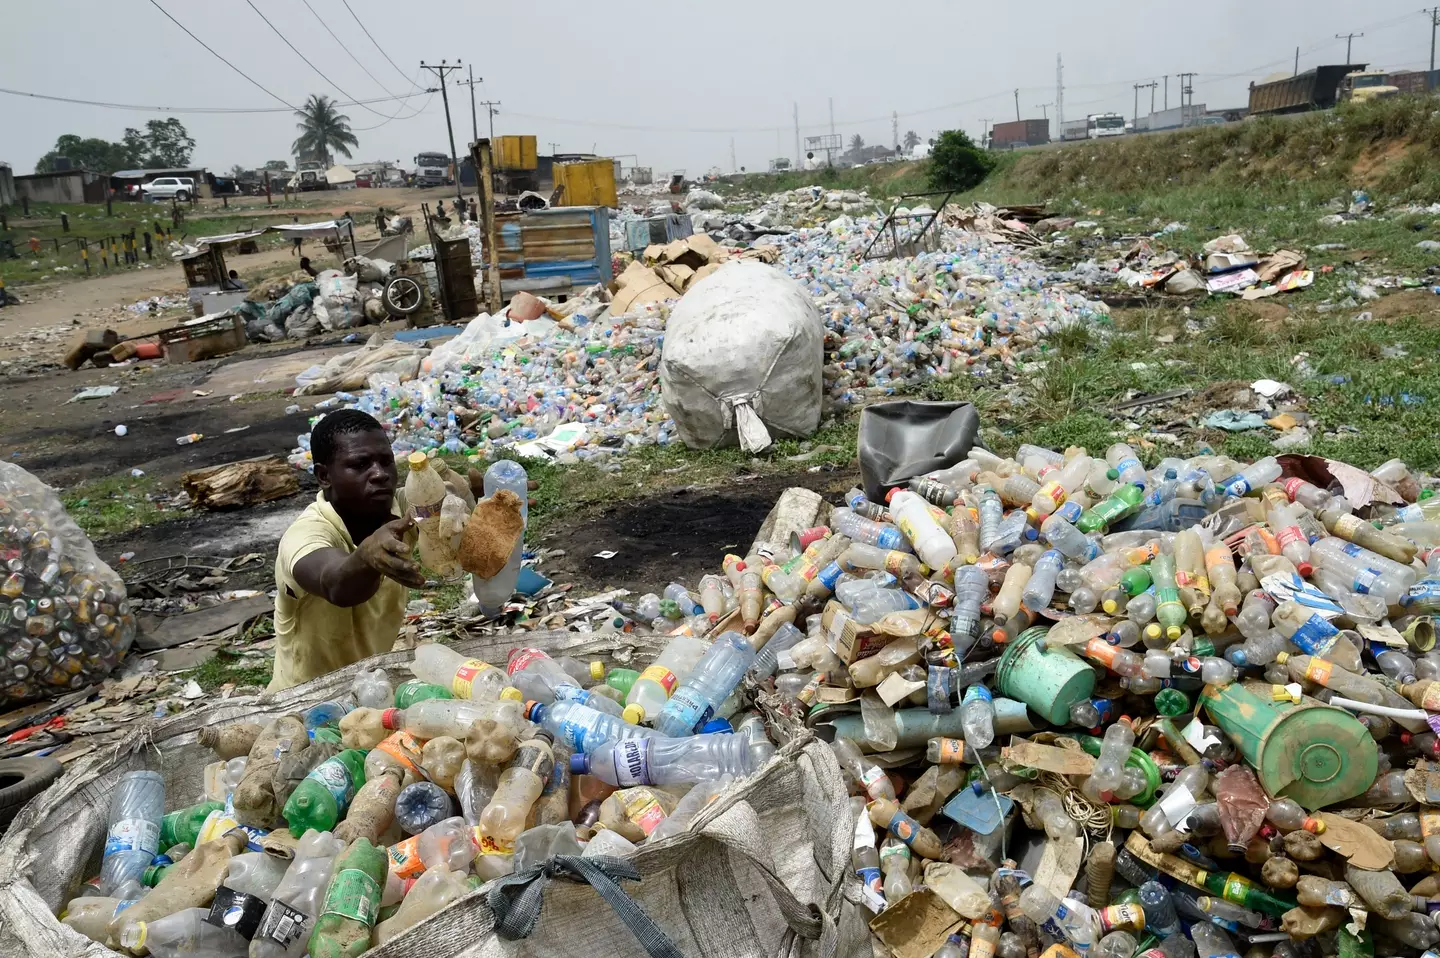 Plastic pollution is a huge issue in Nigeria.